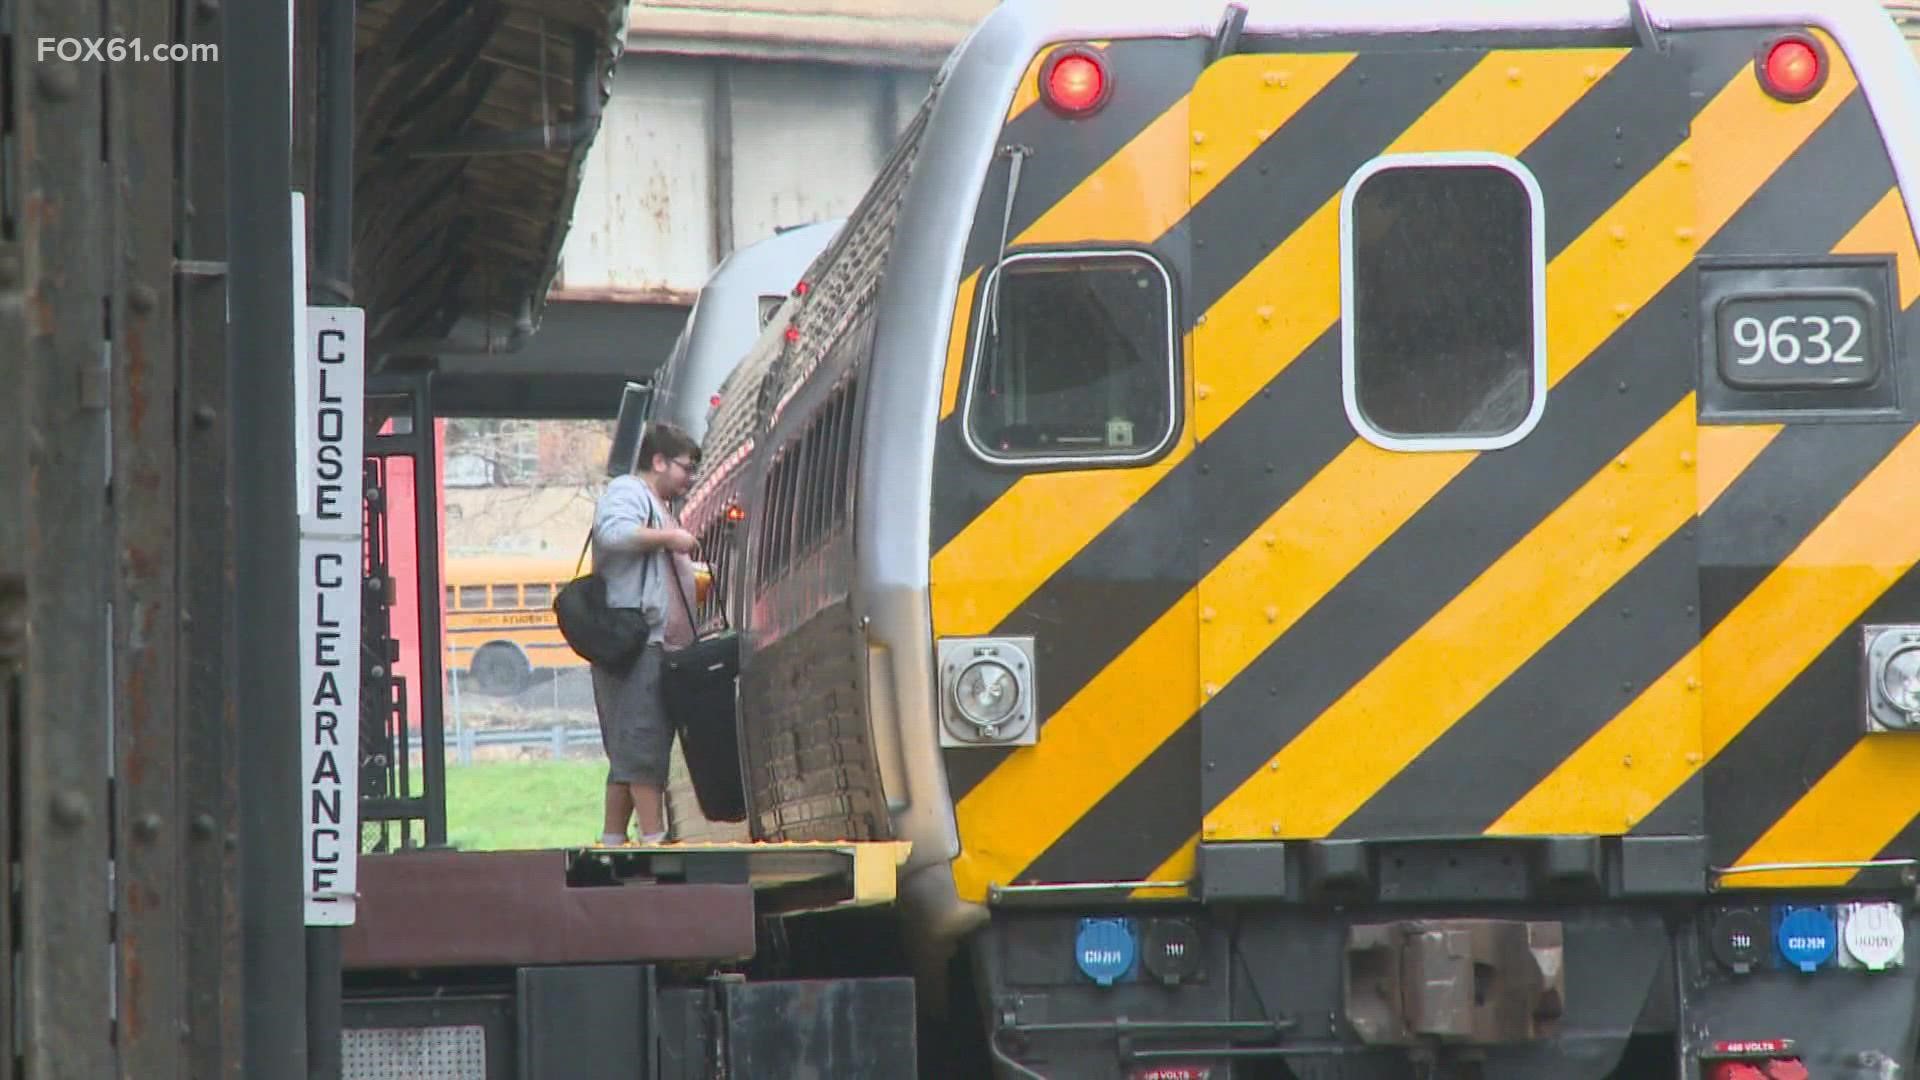 A summer construction project will impact many of Hartford Rail Line's trains and some Amtrak trains through September 11. Passengers will take buses instead.